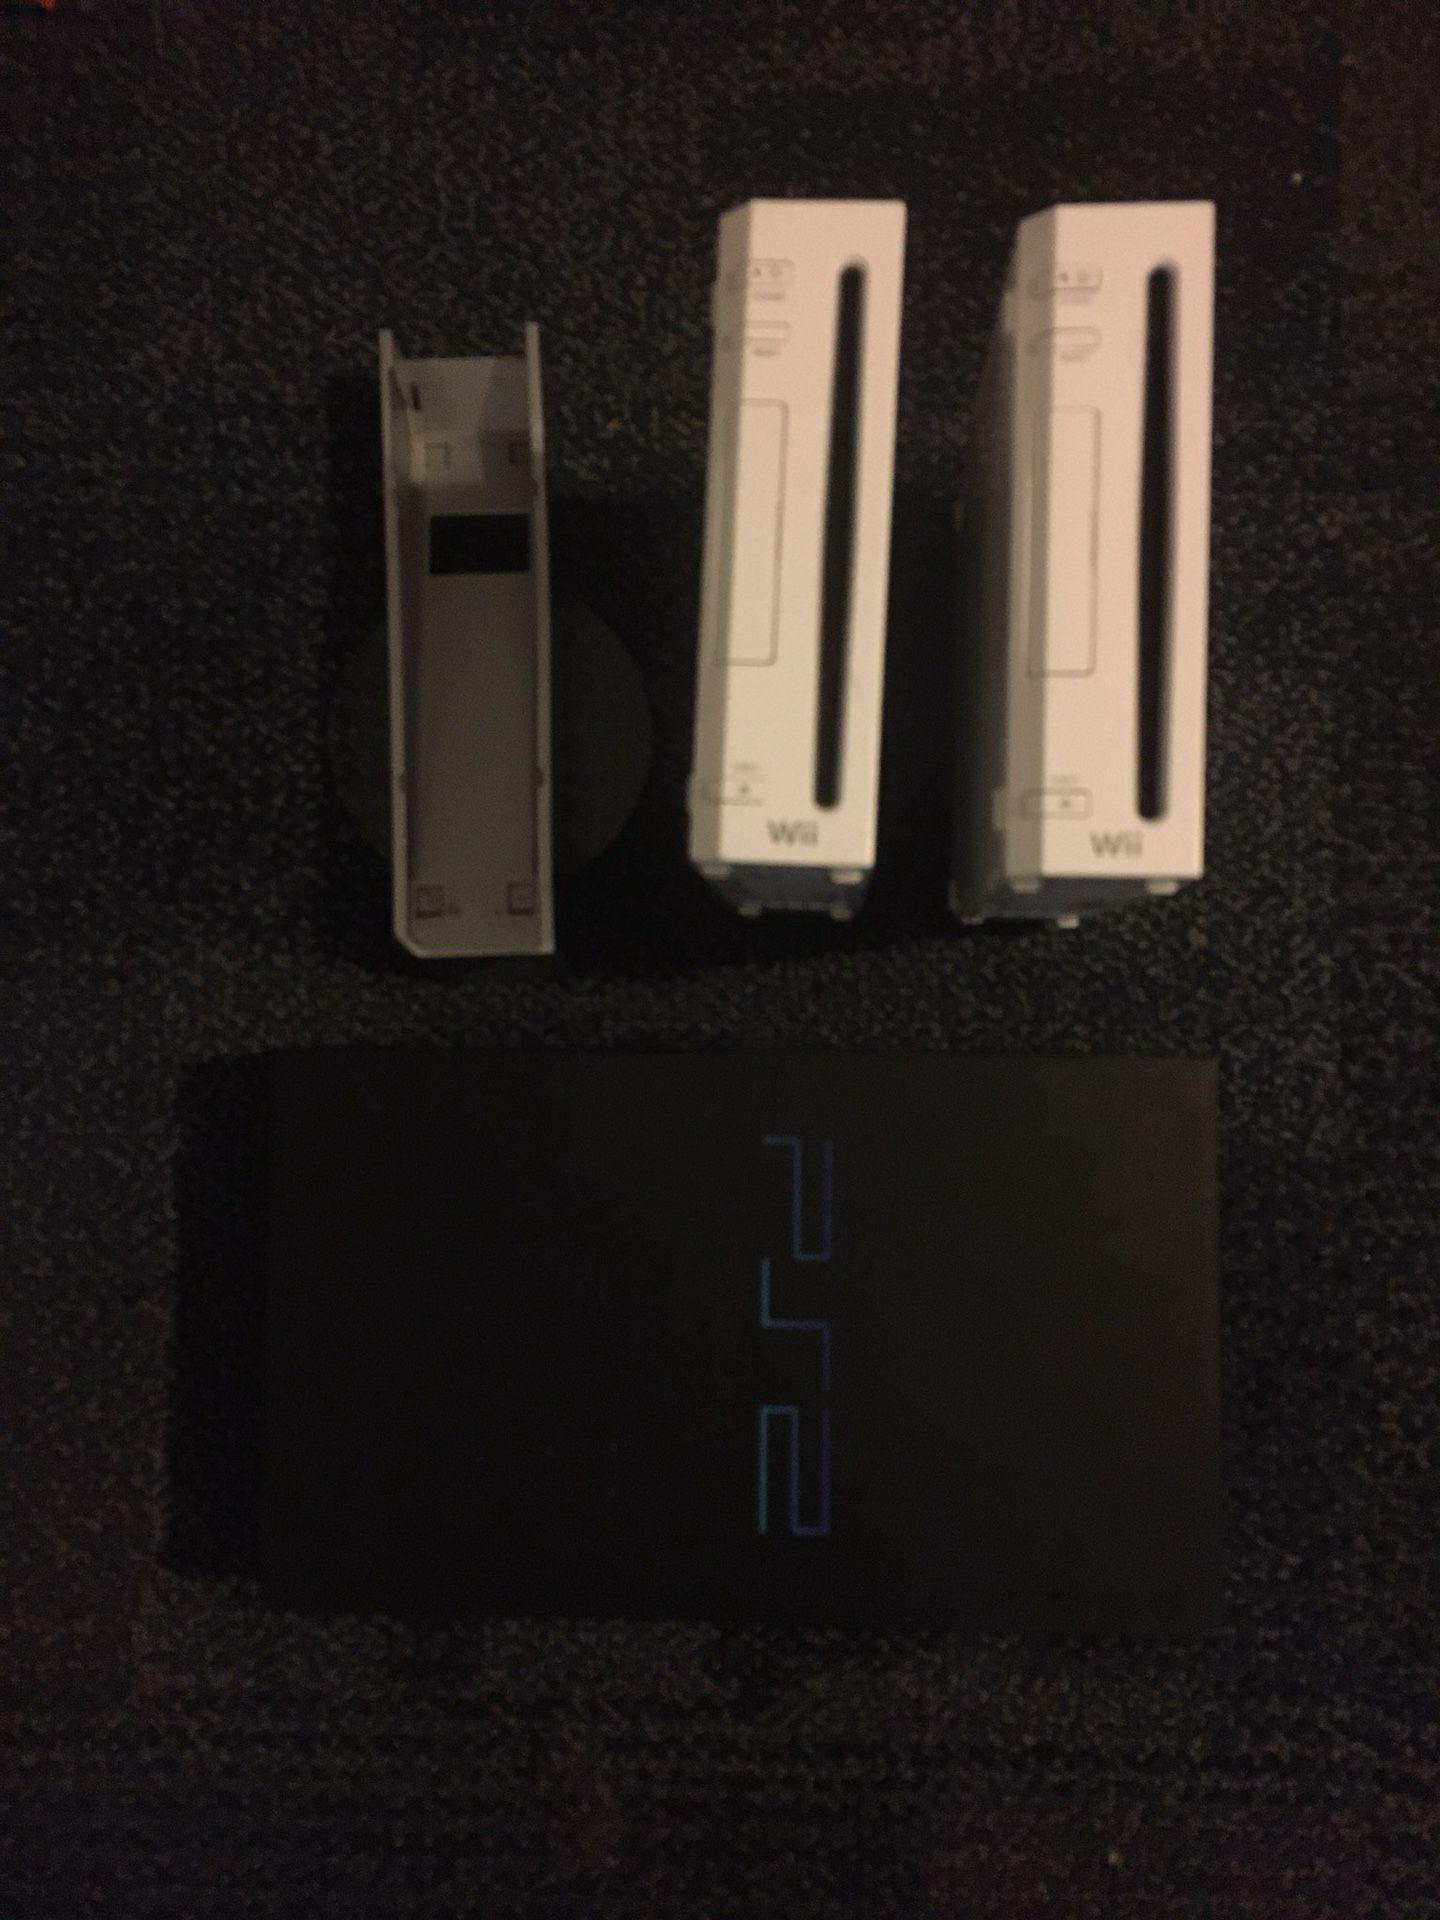 Wii and PS2 game system